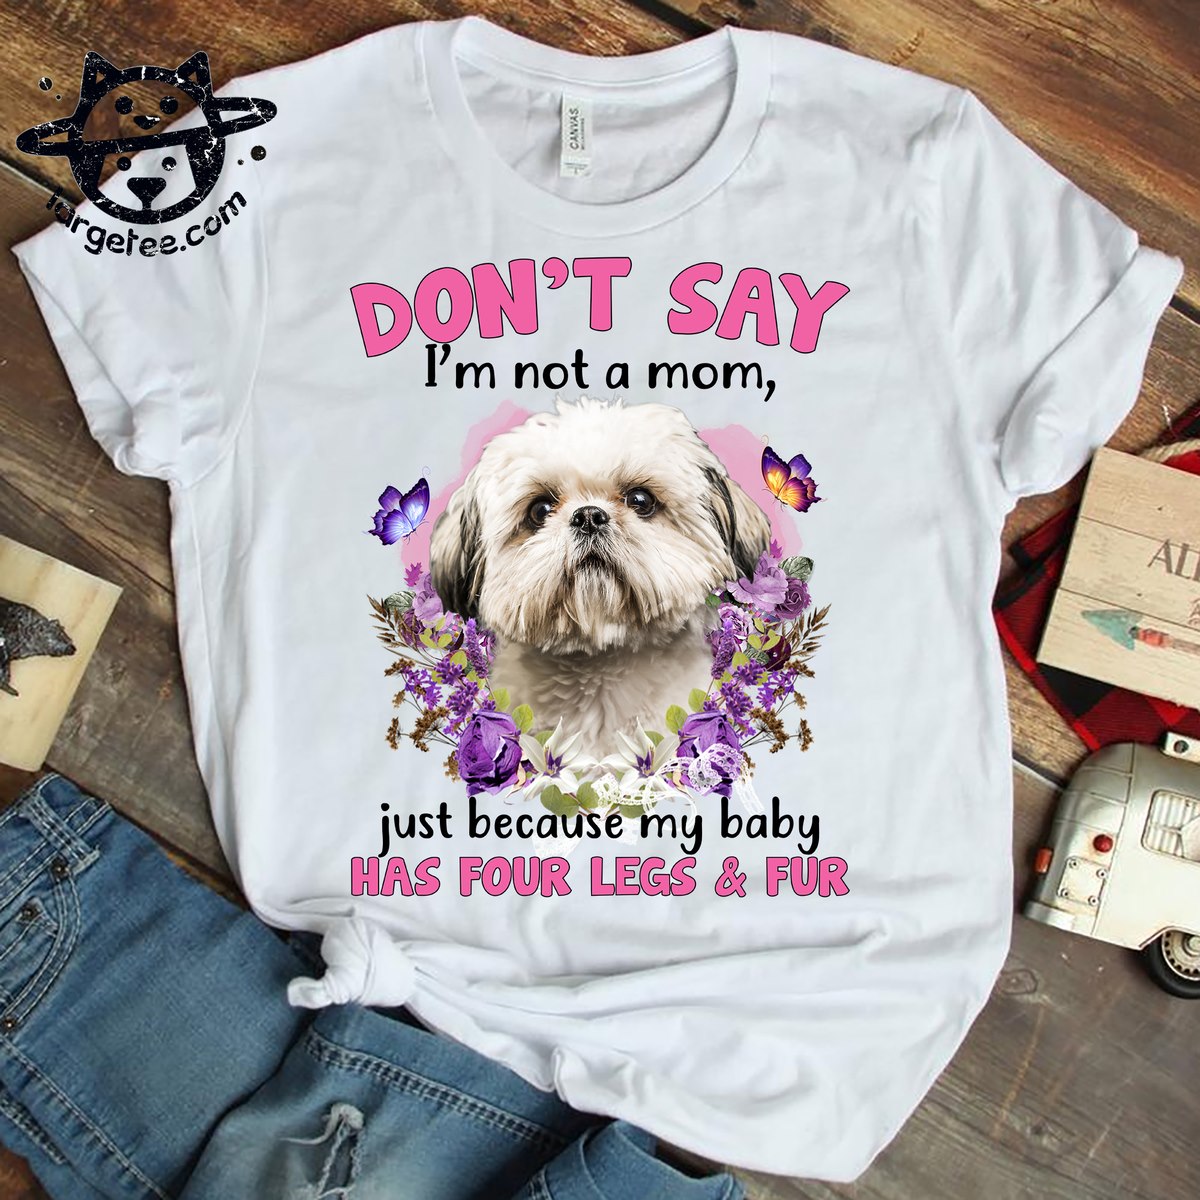 Don't say I'm not a mom, just because my baby has four legs and fur - Shih Tzu dog